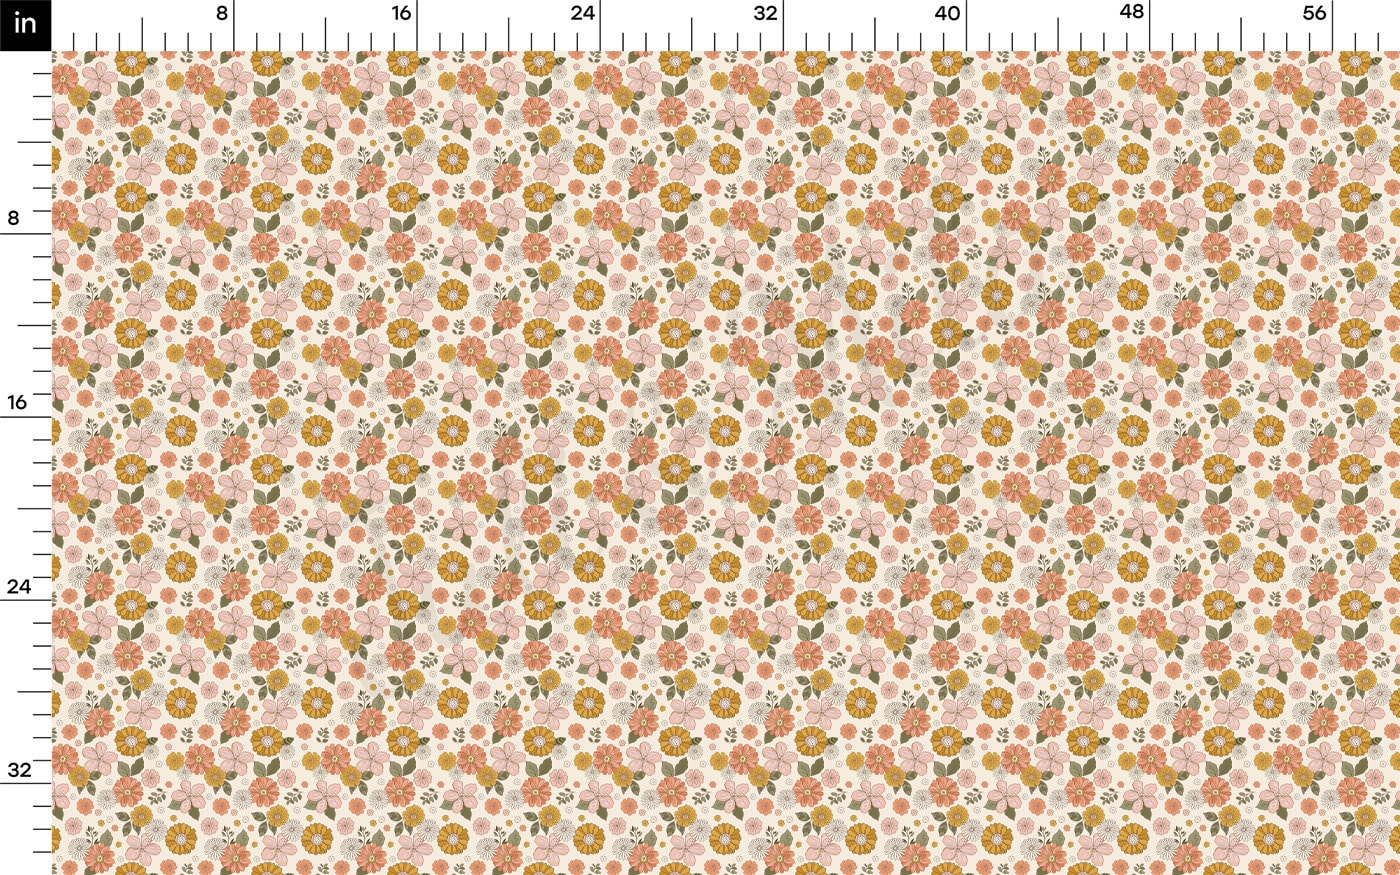 Floral DBP Fabric Double Brushed Polyester Fabric by the Yard DBP Jersey Stretchy Soft Polyester Stretch Fabric DBP2194